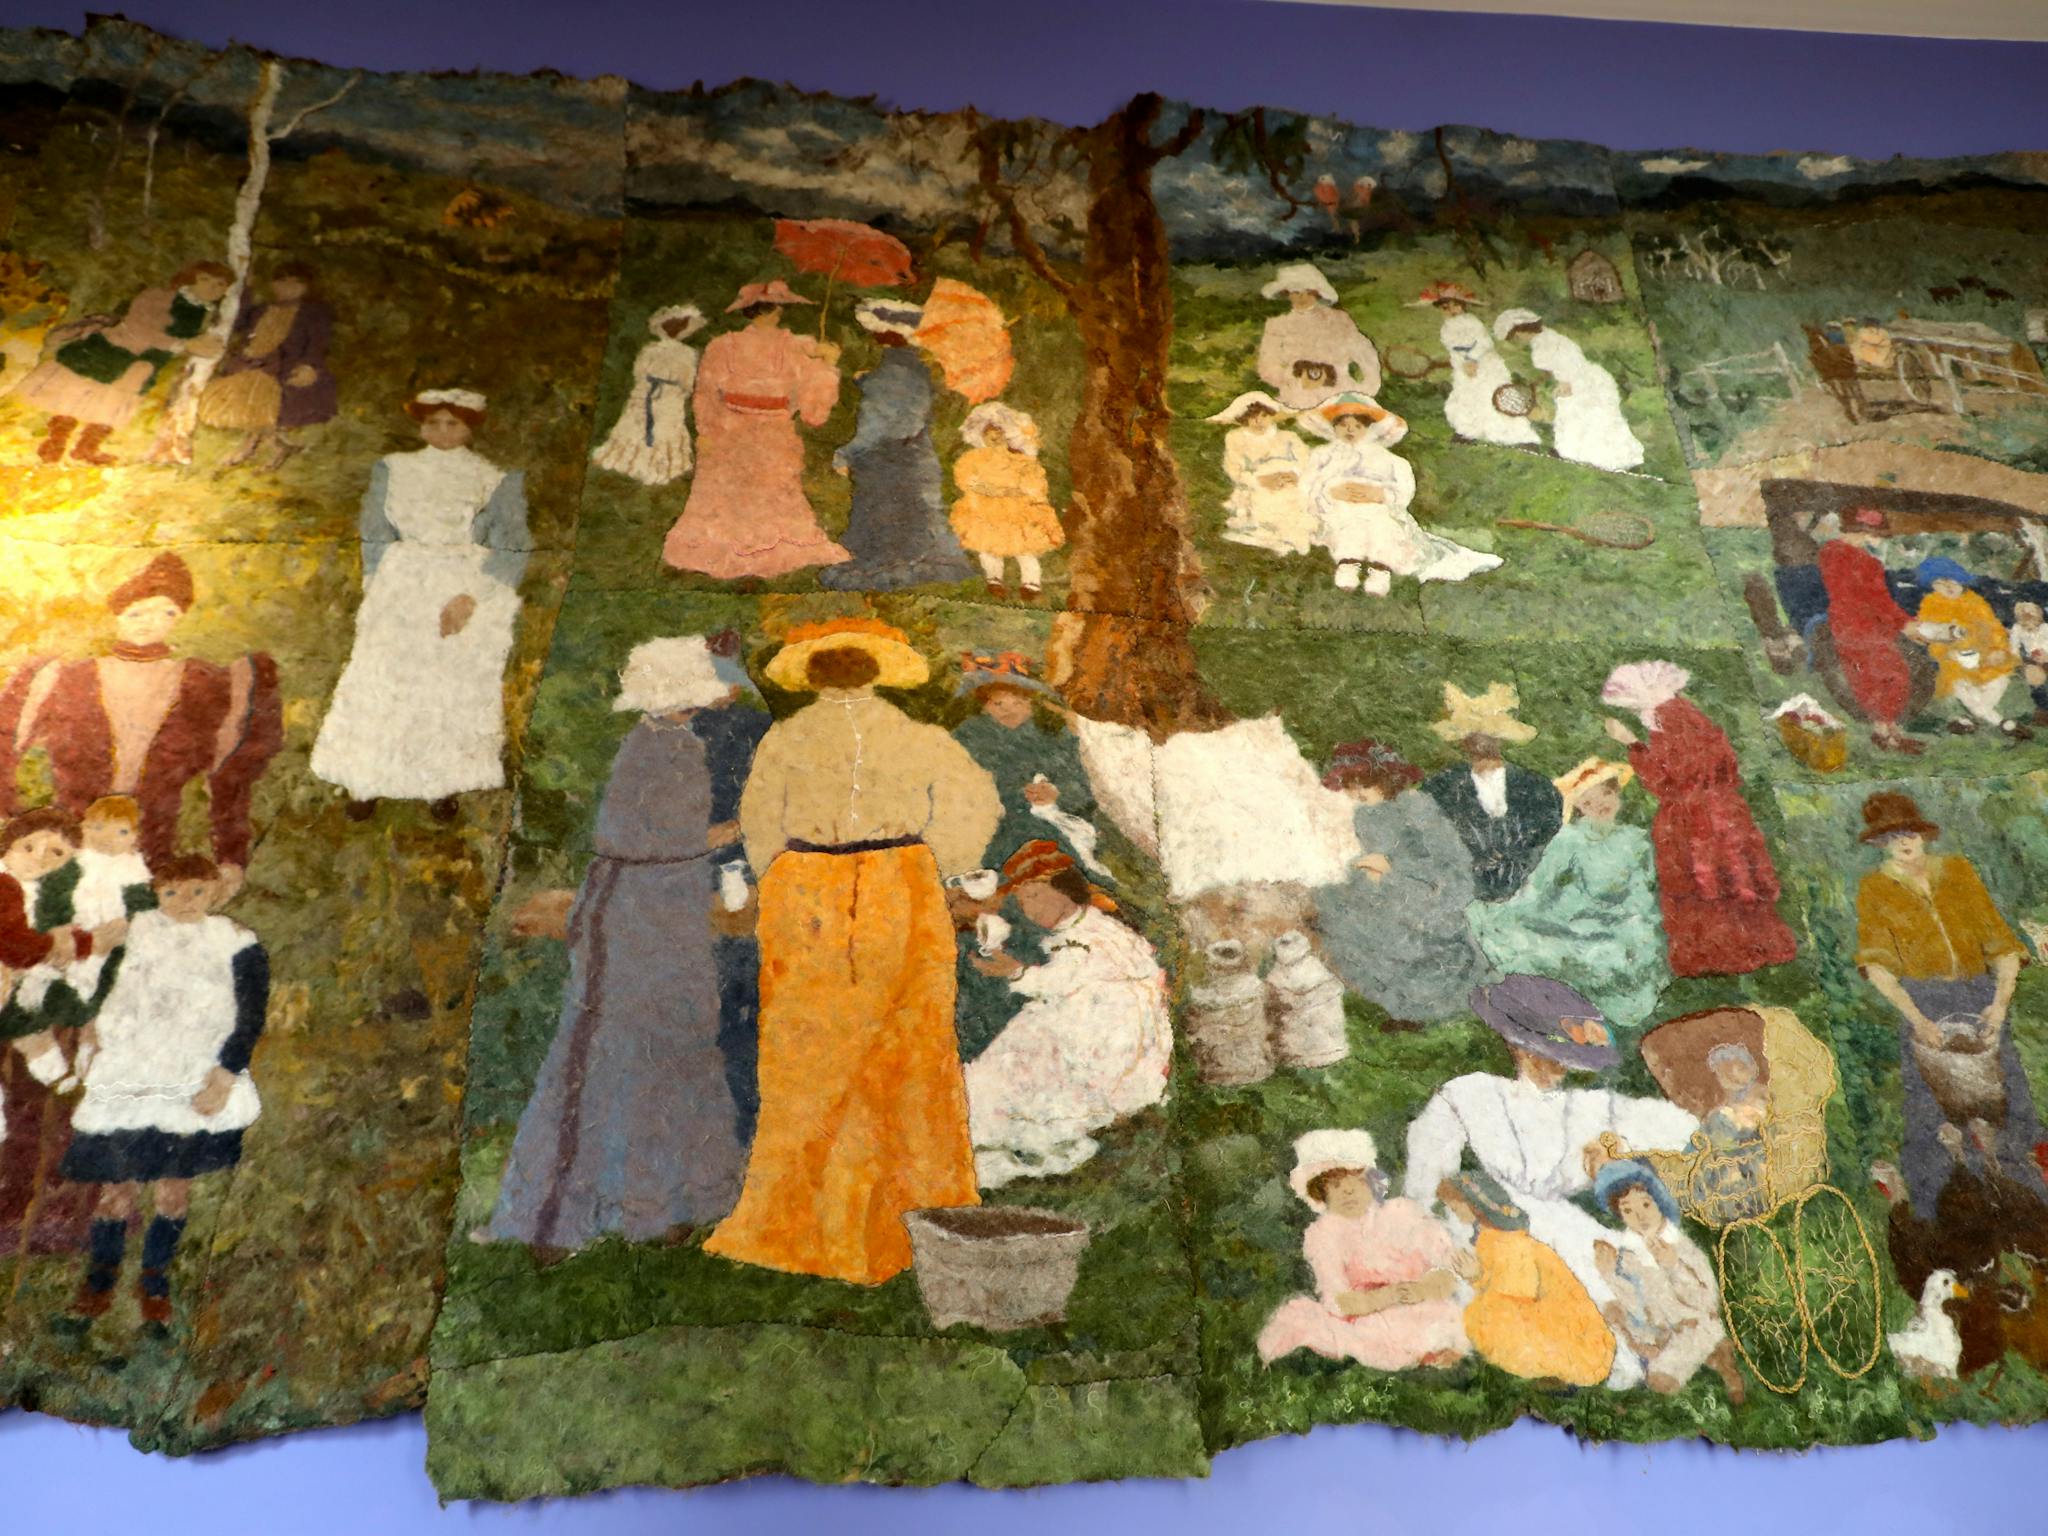 Felt Mural at the Mansfield Visitor Centre